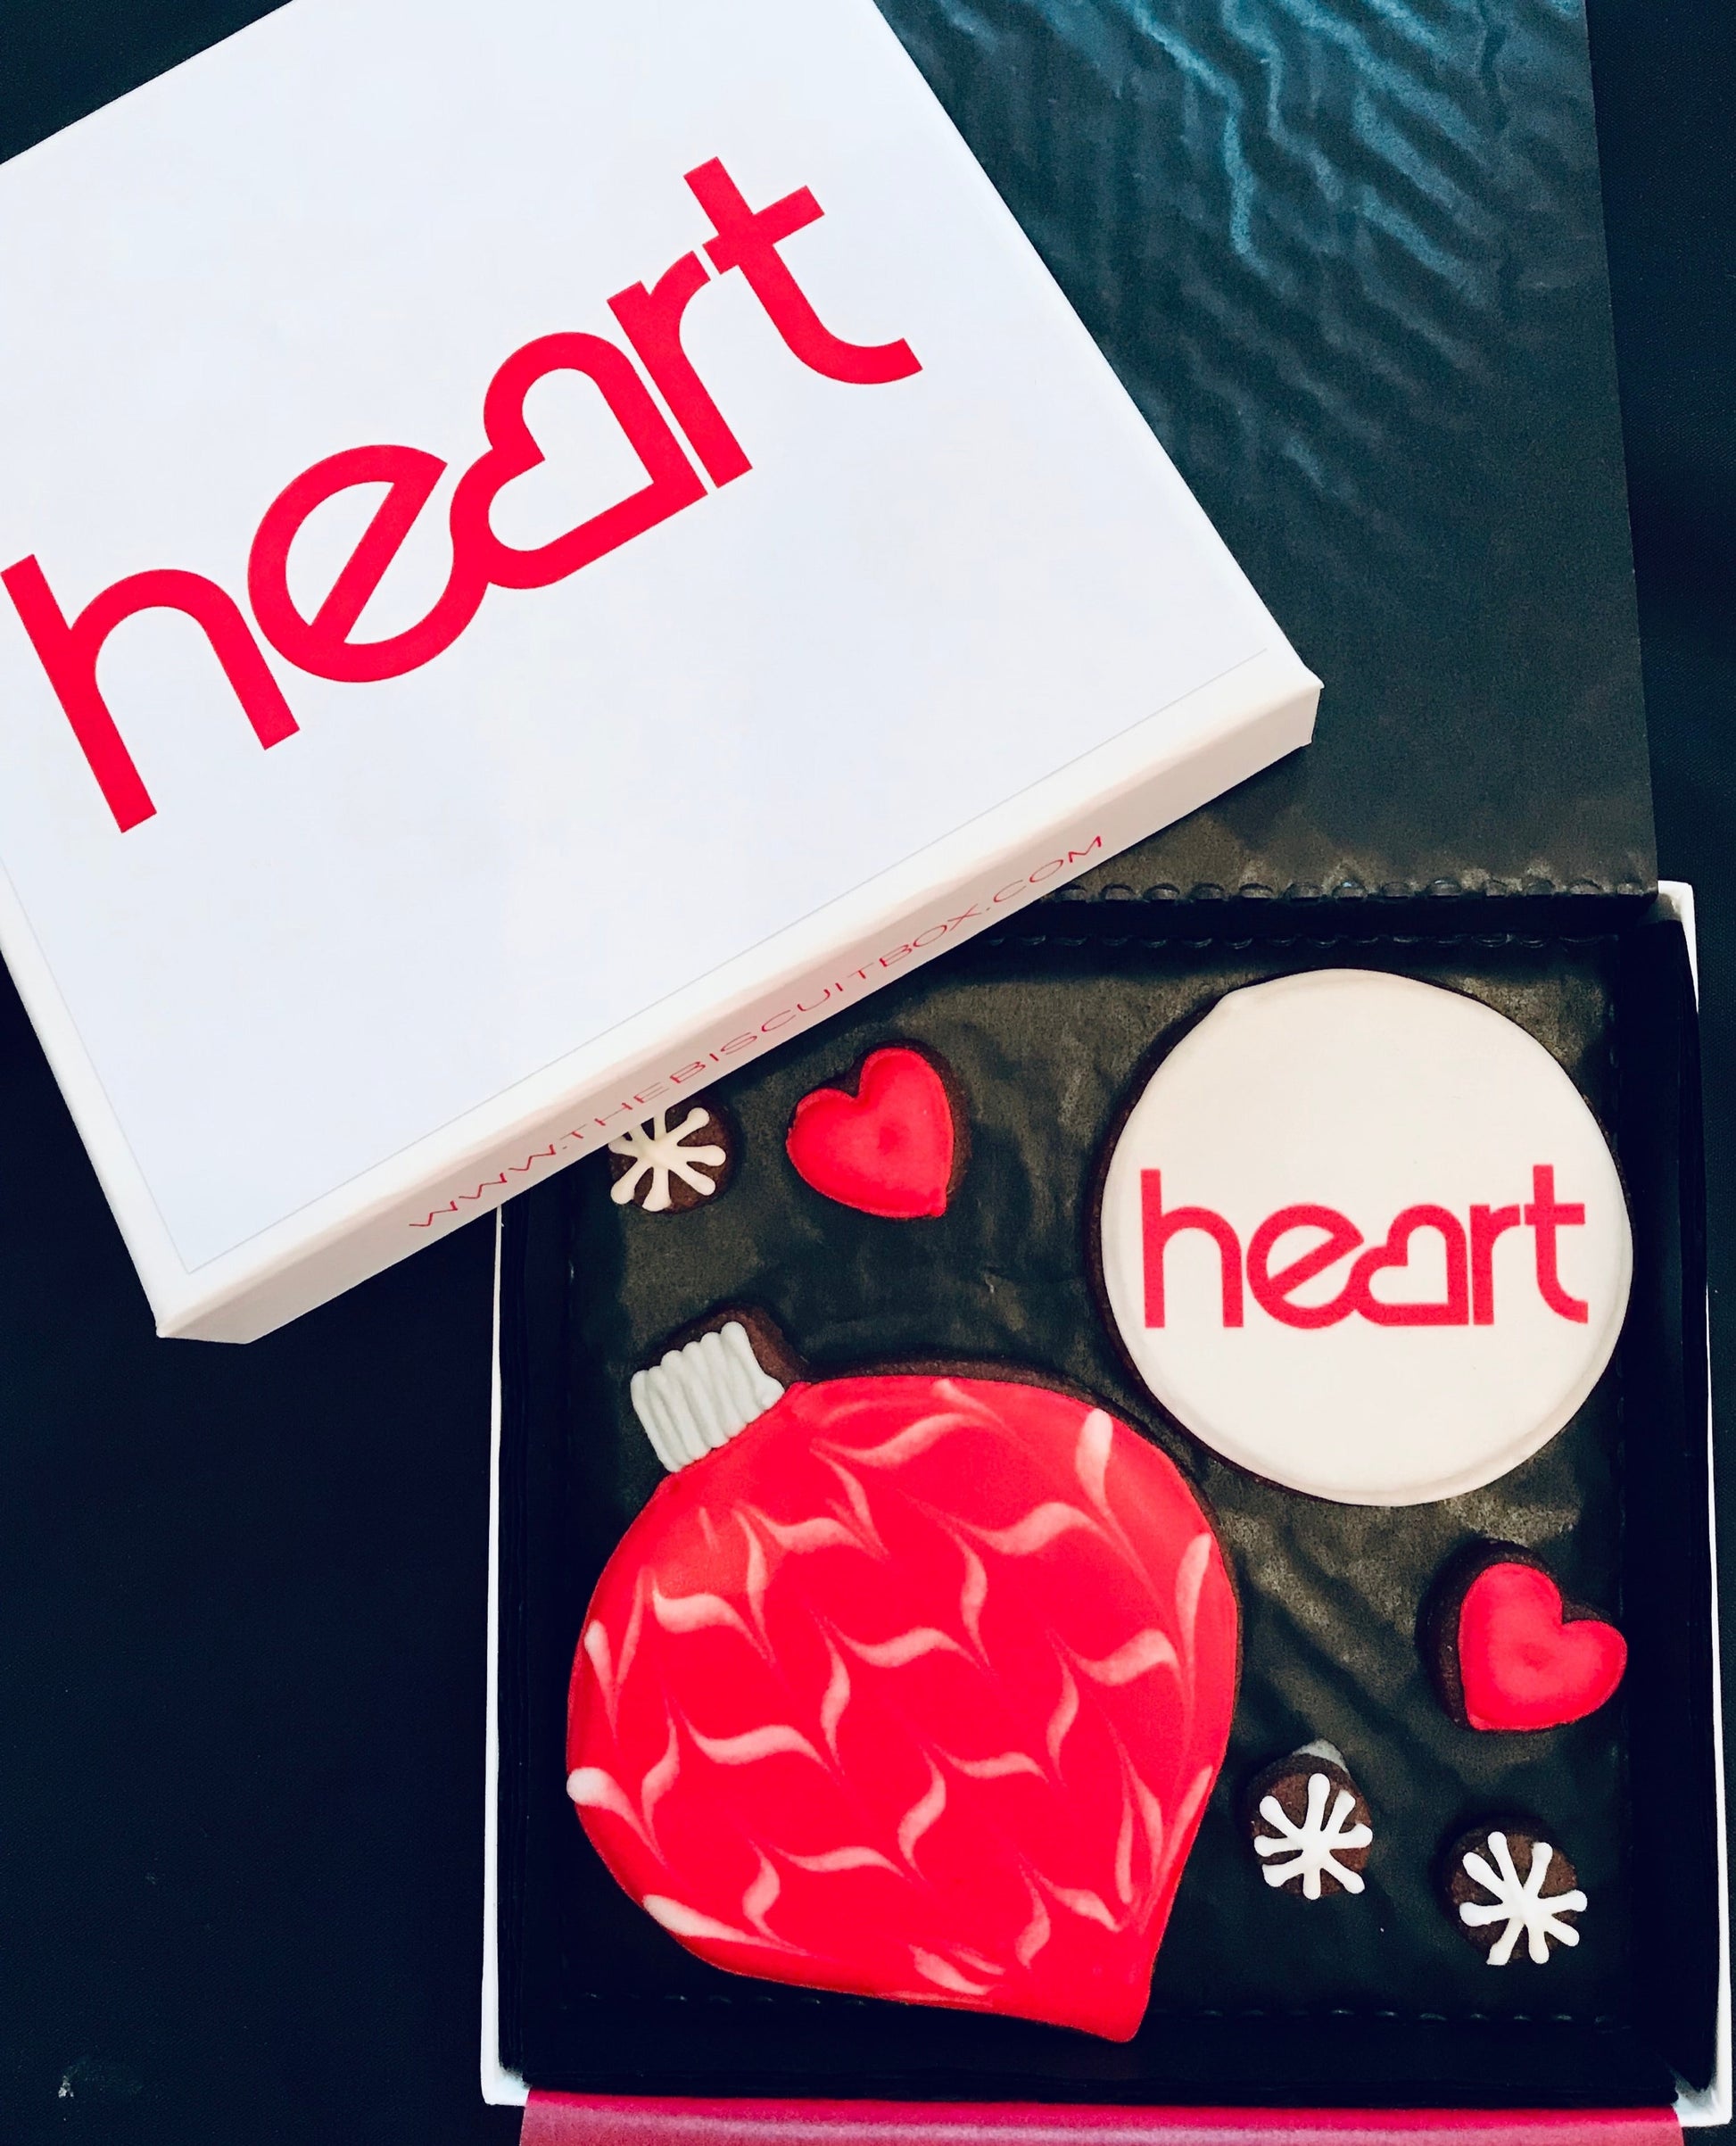 heart fm biscuit card and matching red Christmas cookies. Red biscuit bauble and corporate gift example.